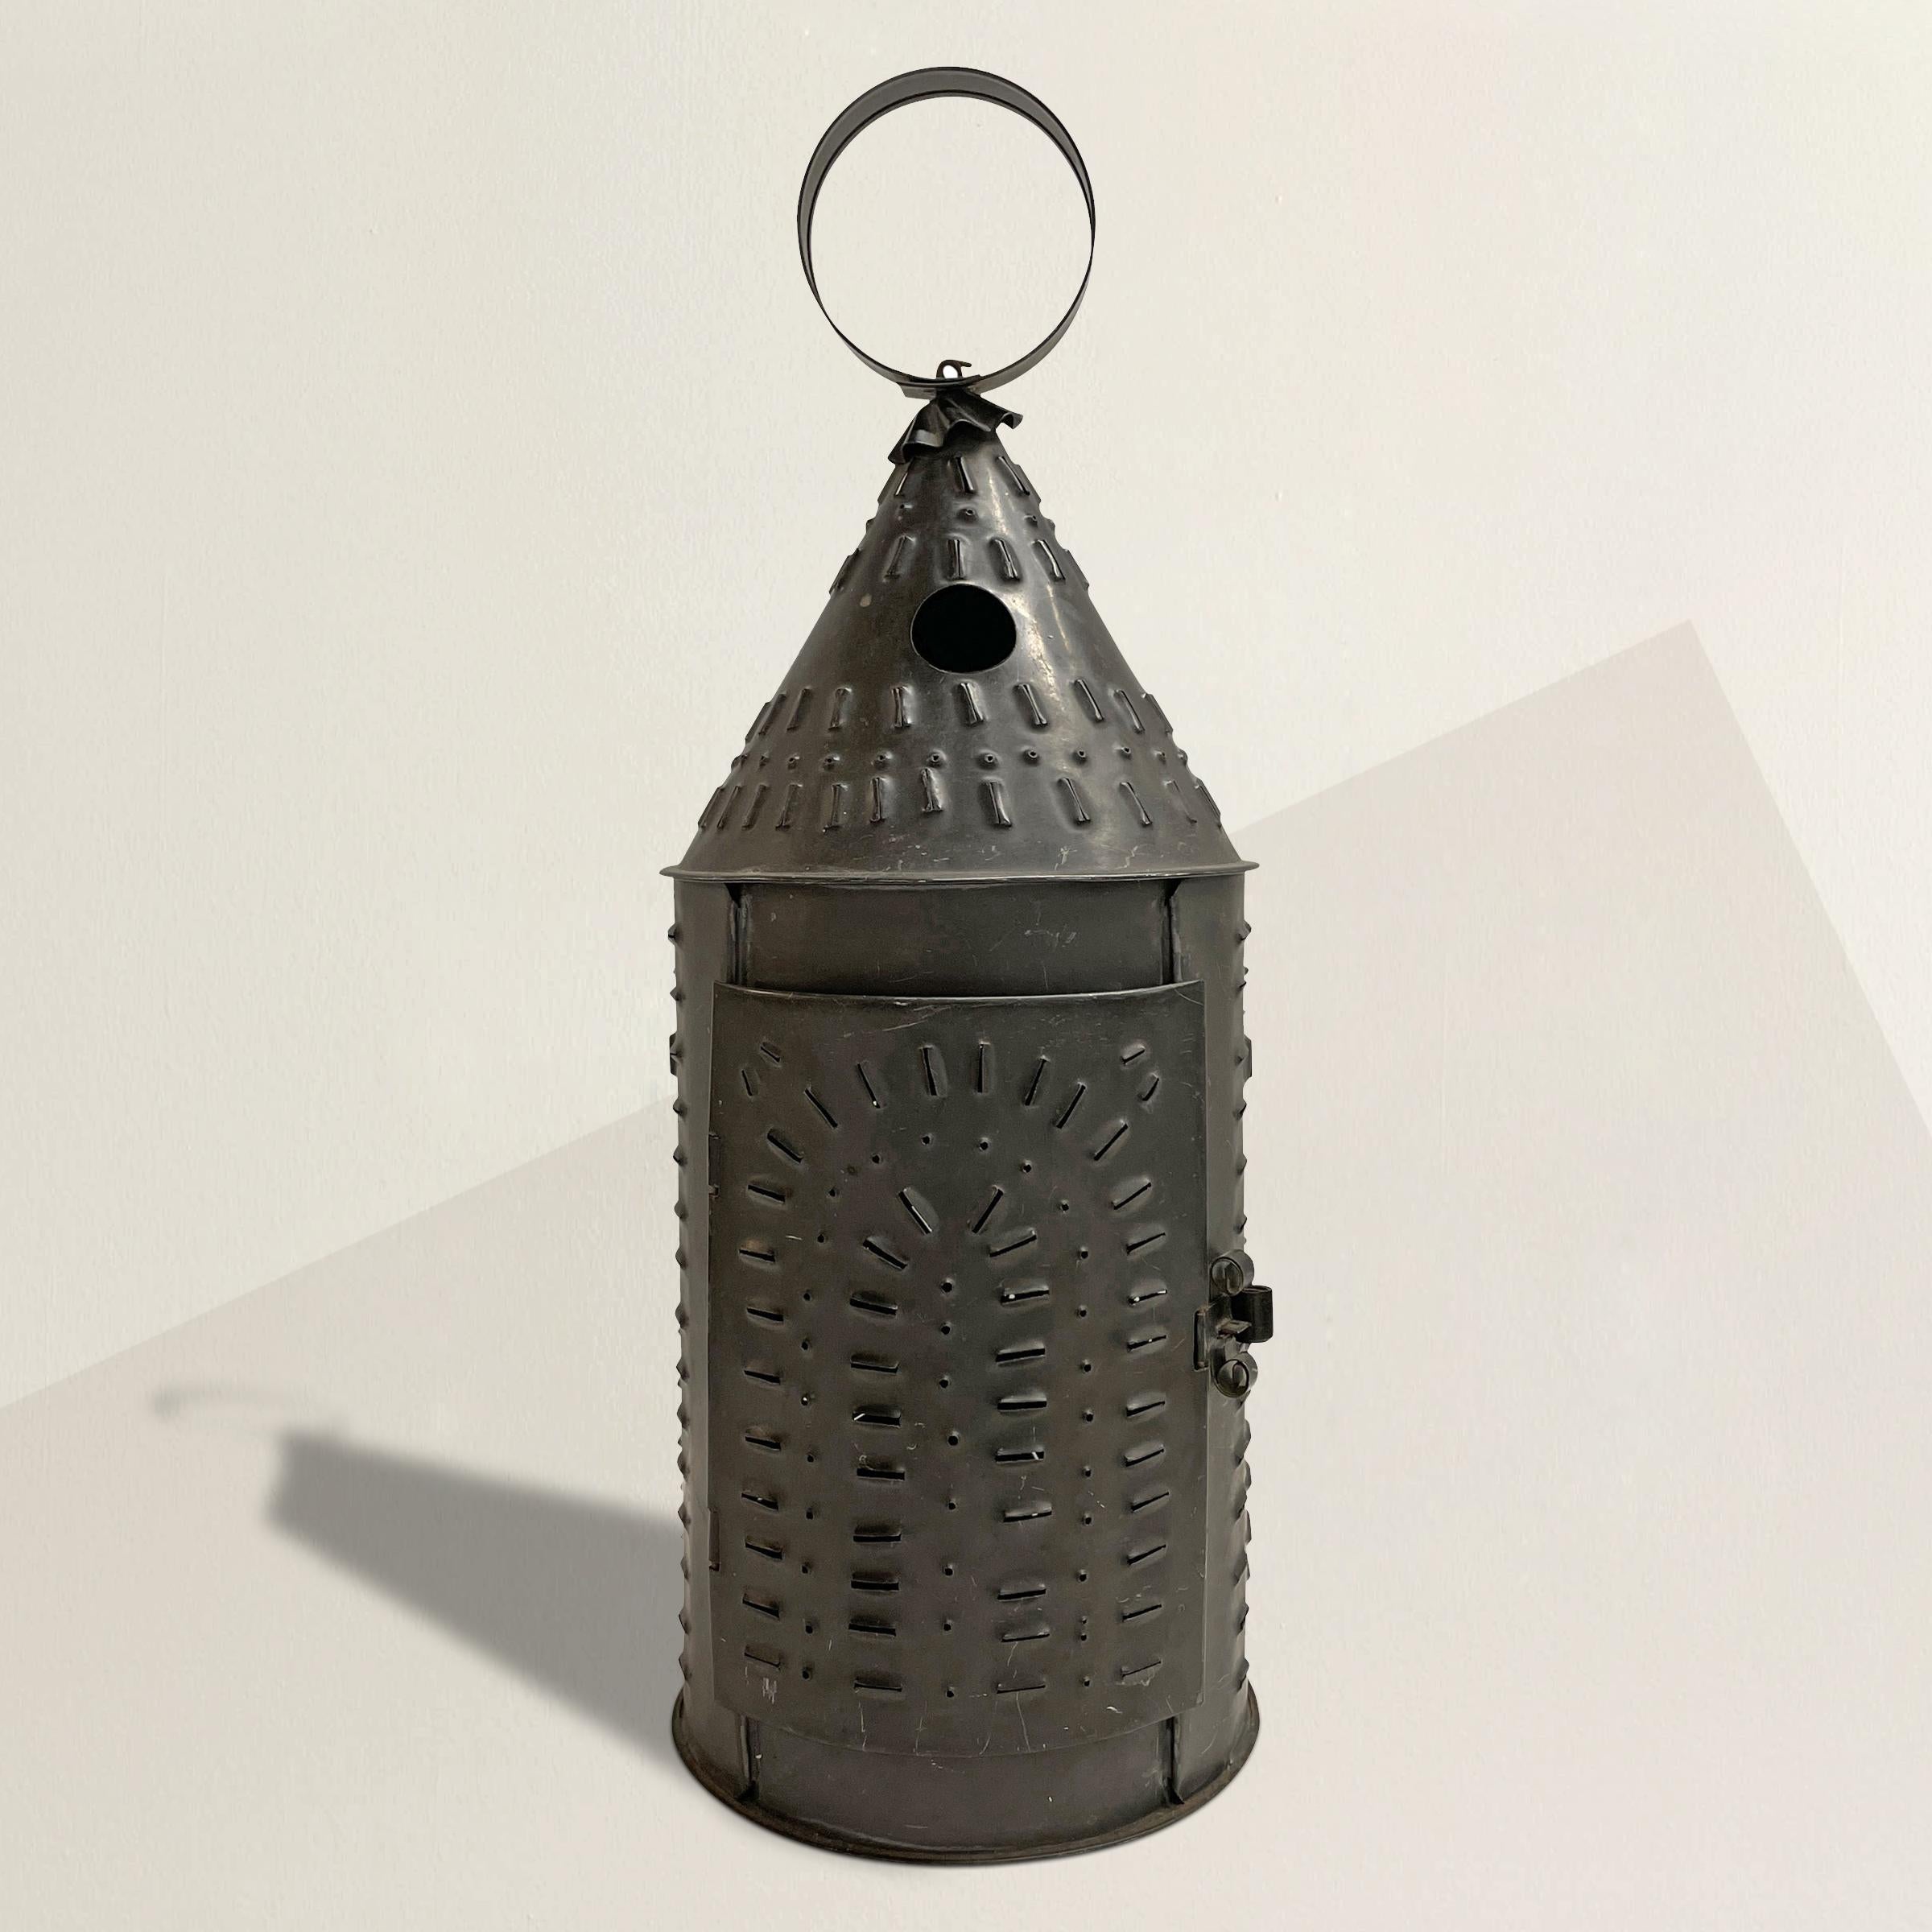 A charming 20th century American punched tin candle lantern with simple geometric pattern, a ring for hanging, and a door for accessing the candle. The lantern is currently used with a candle, but it would be fairly simple to have it wired.